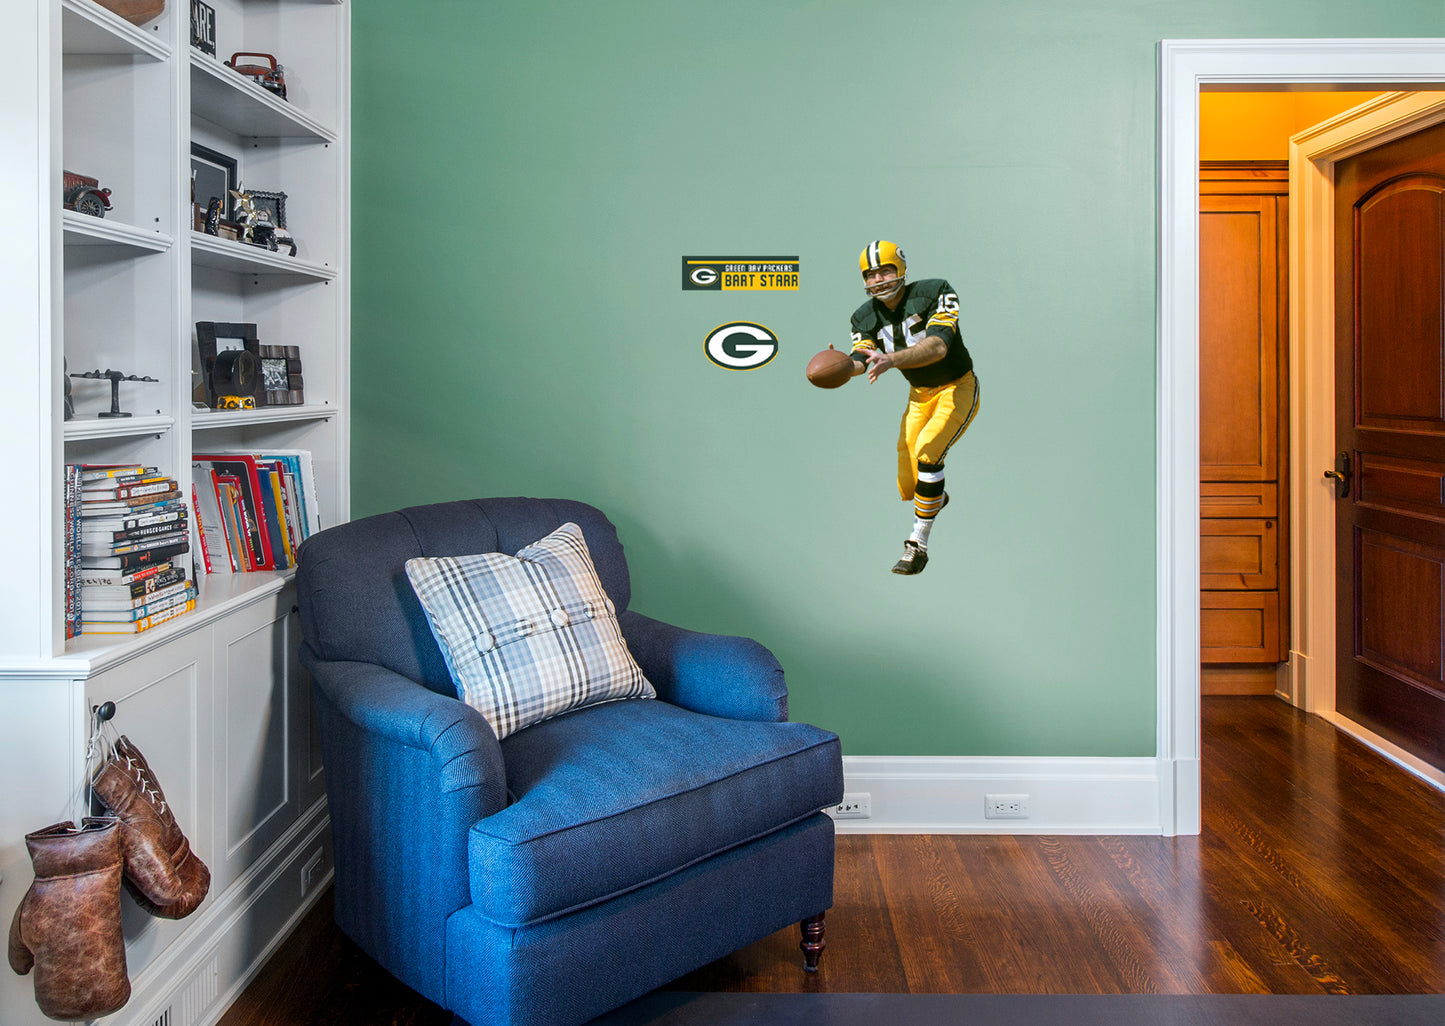 Green Bay Packers: Bart Starr 2021 Legend        - Officially Licensed NFL Removable Wall   Adhesive Decal